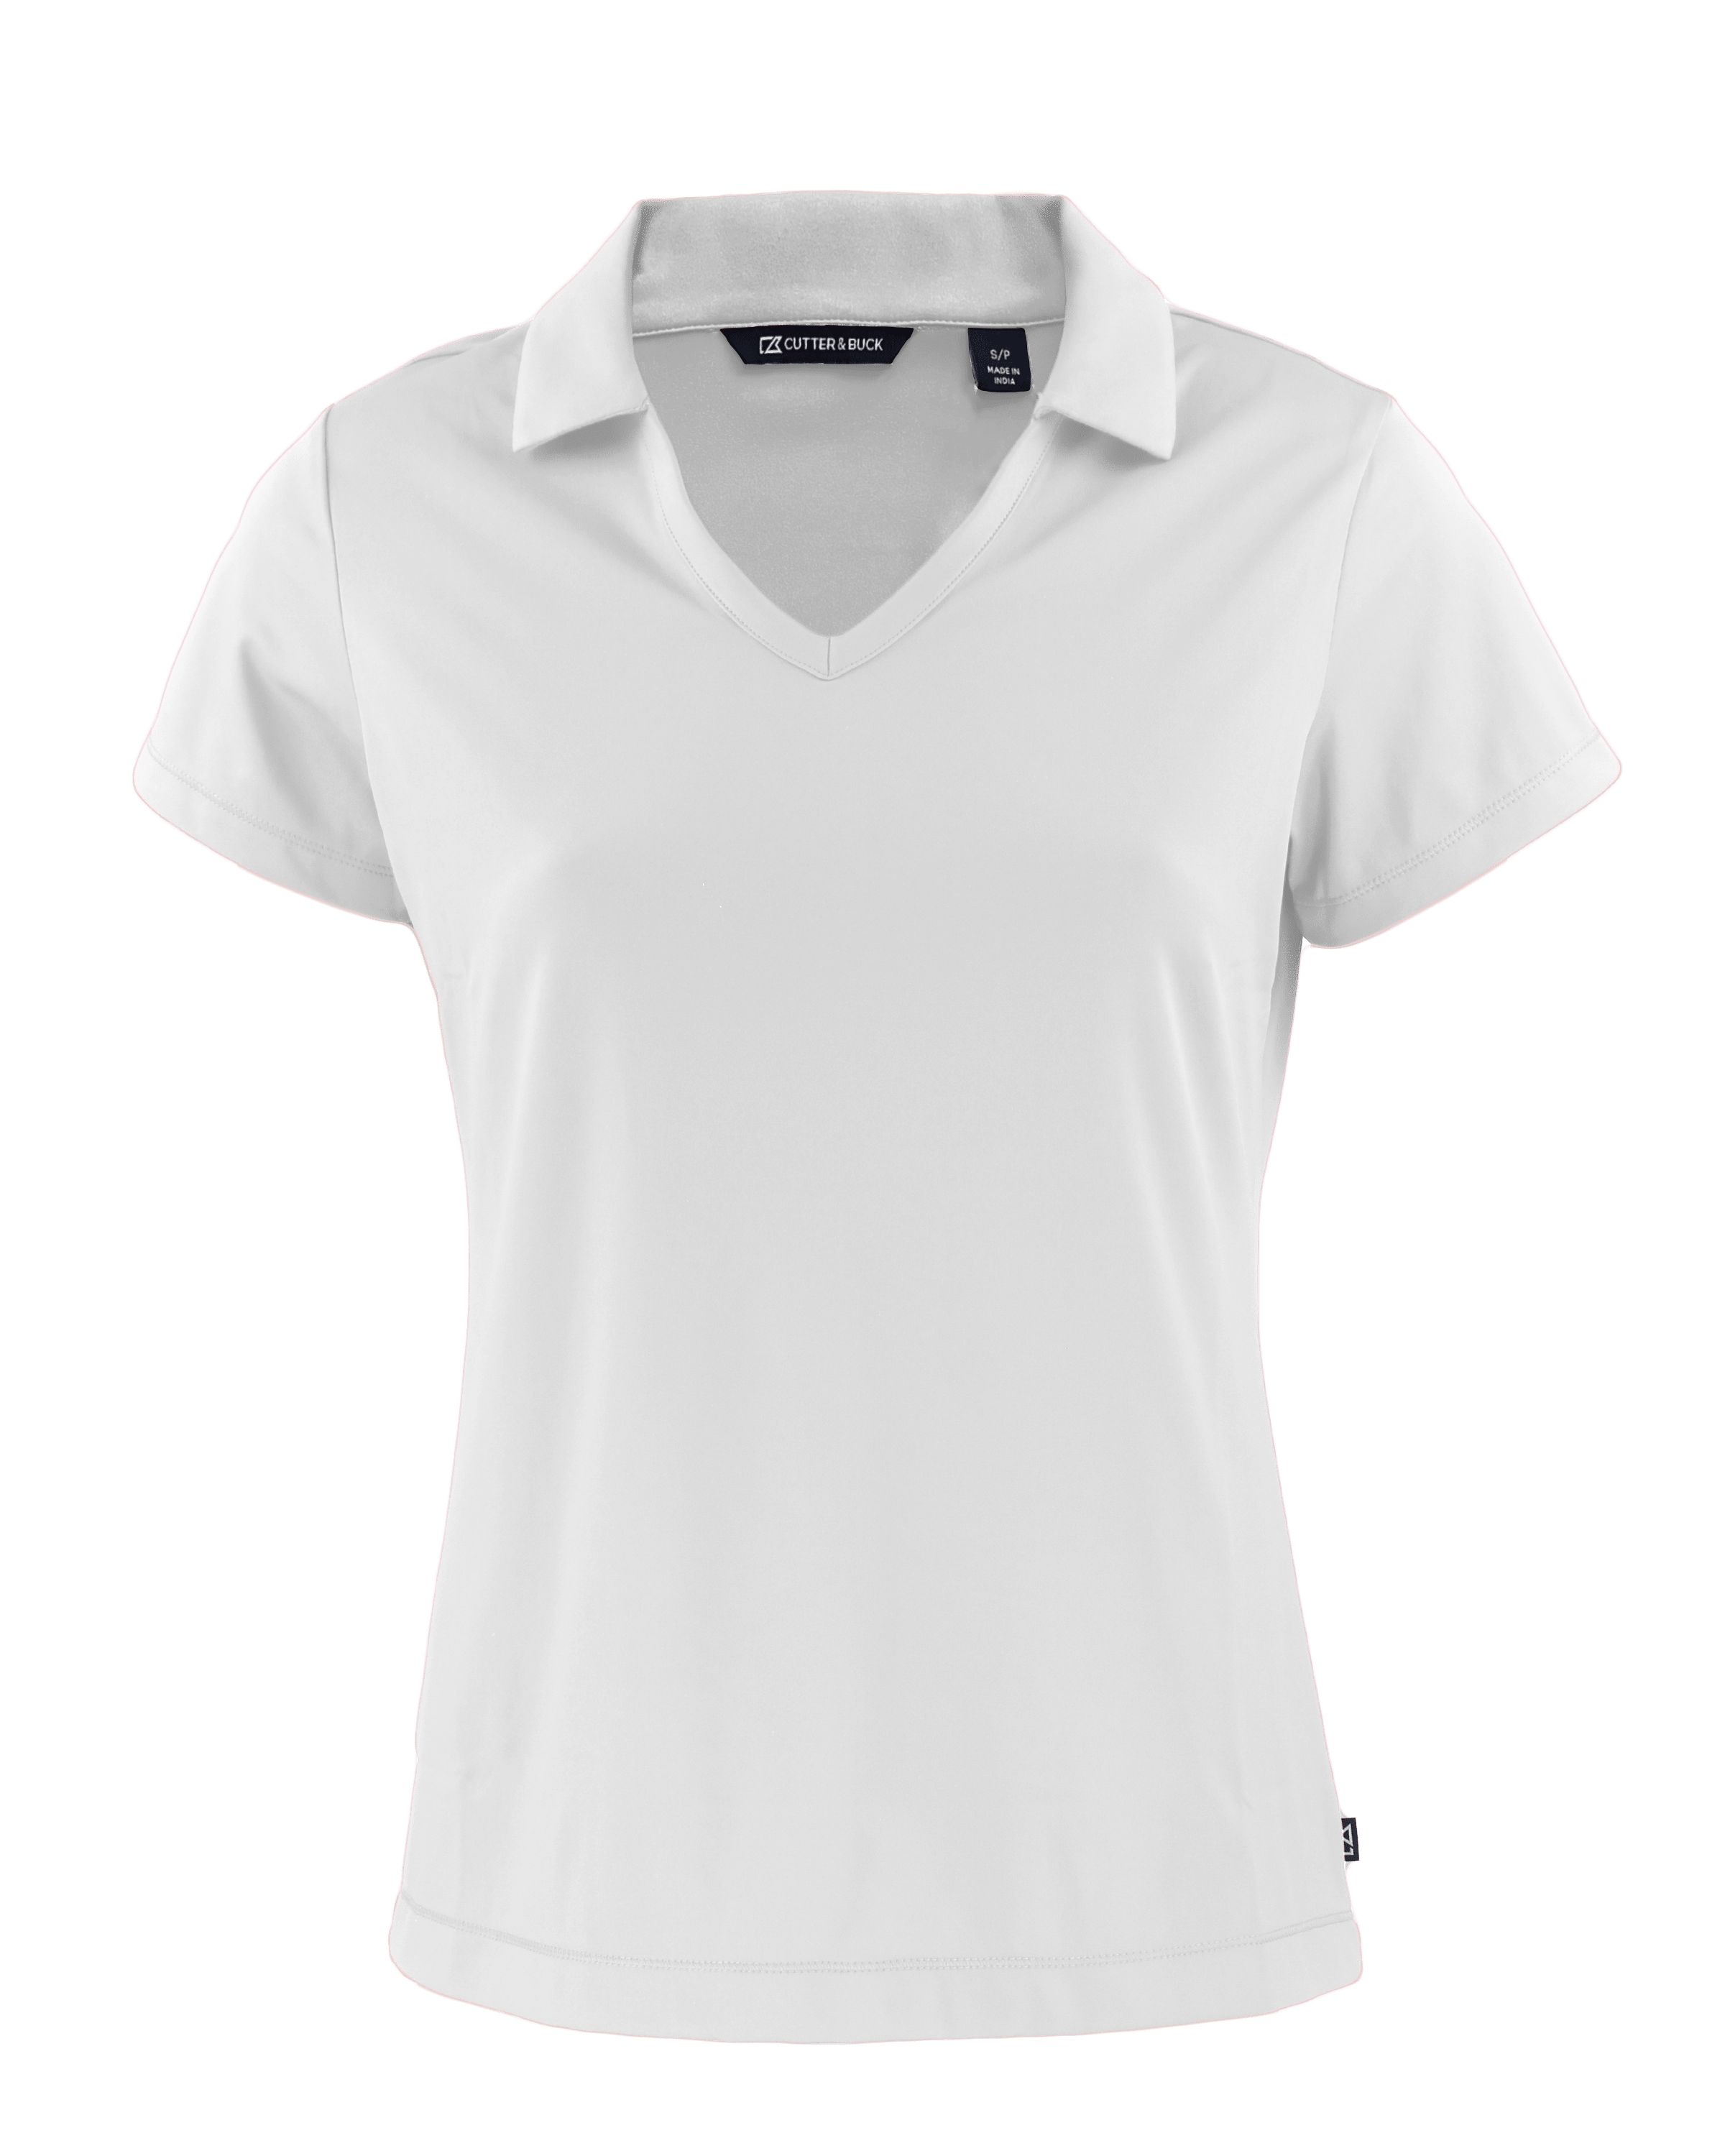 CUTTER & BUCK LCK00166 - Women's Daybreak Eco Recycled V-neck Polo